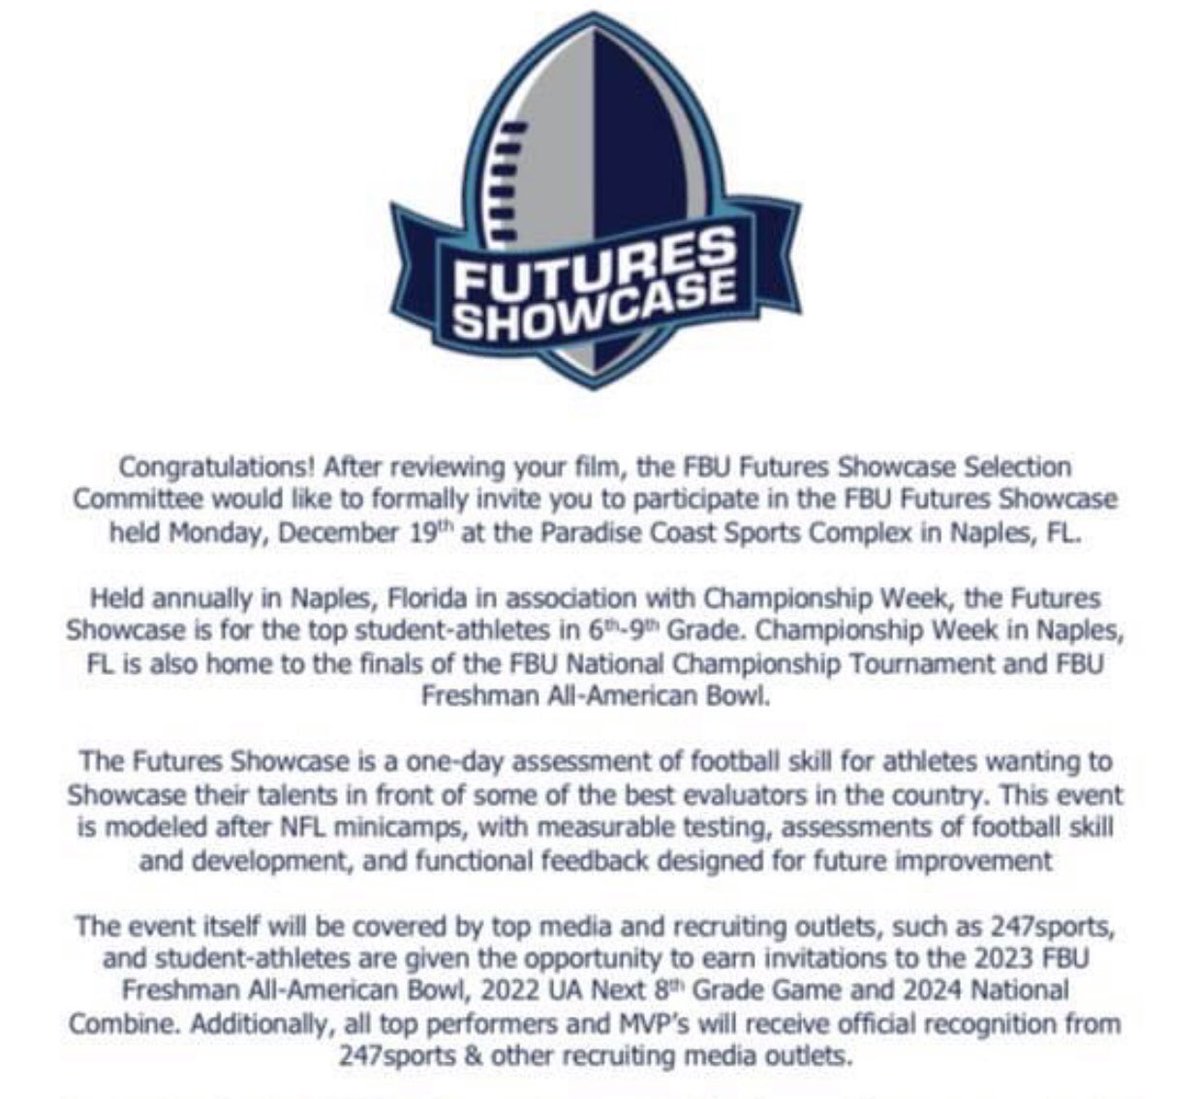 Thankful for this opportunity to showcase my skills at the underclassman future showcase🙏🏾 @FBUcamp @FBUAllAmerican @FBU_NC @AWilliamsUSA